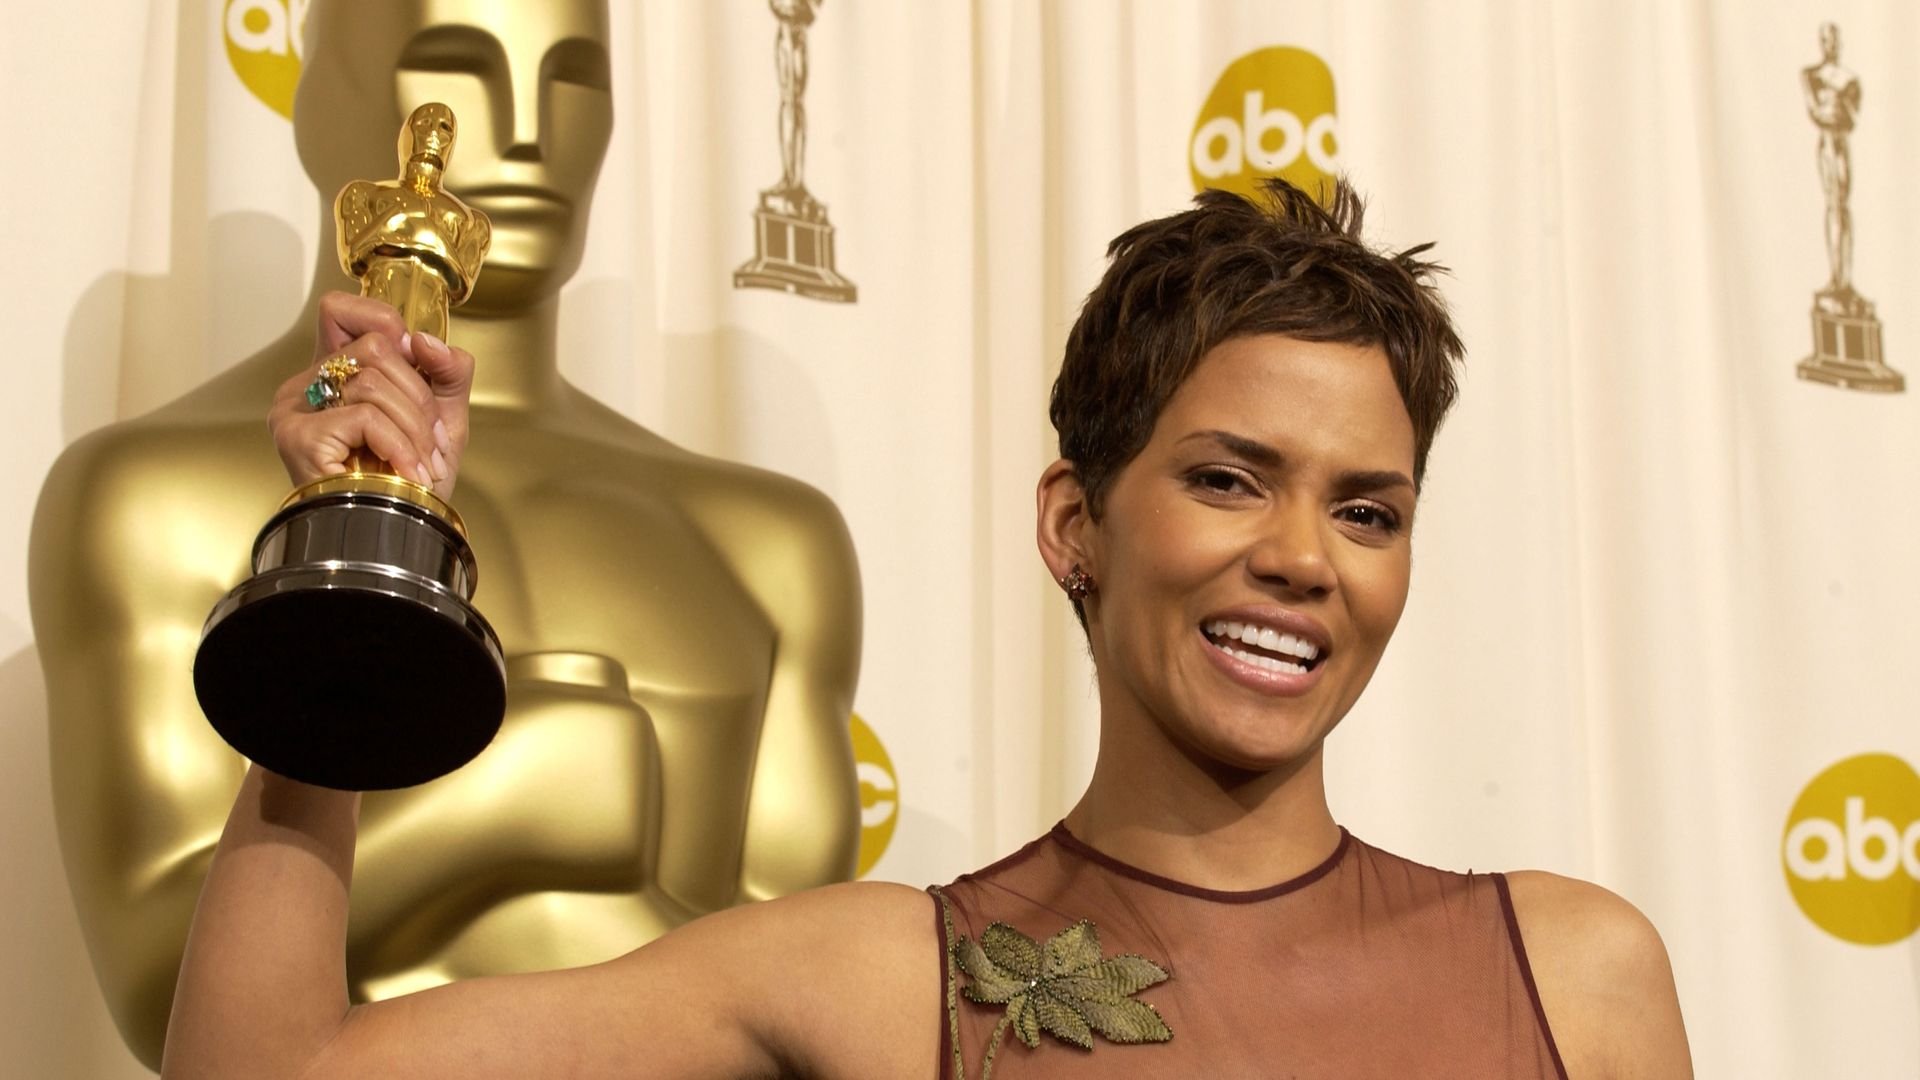 Cleveland Oscar history: From Halle Berry to Tom Hanks